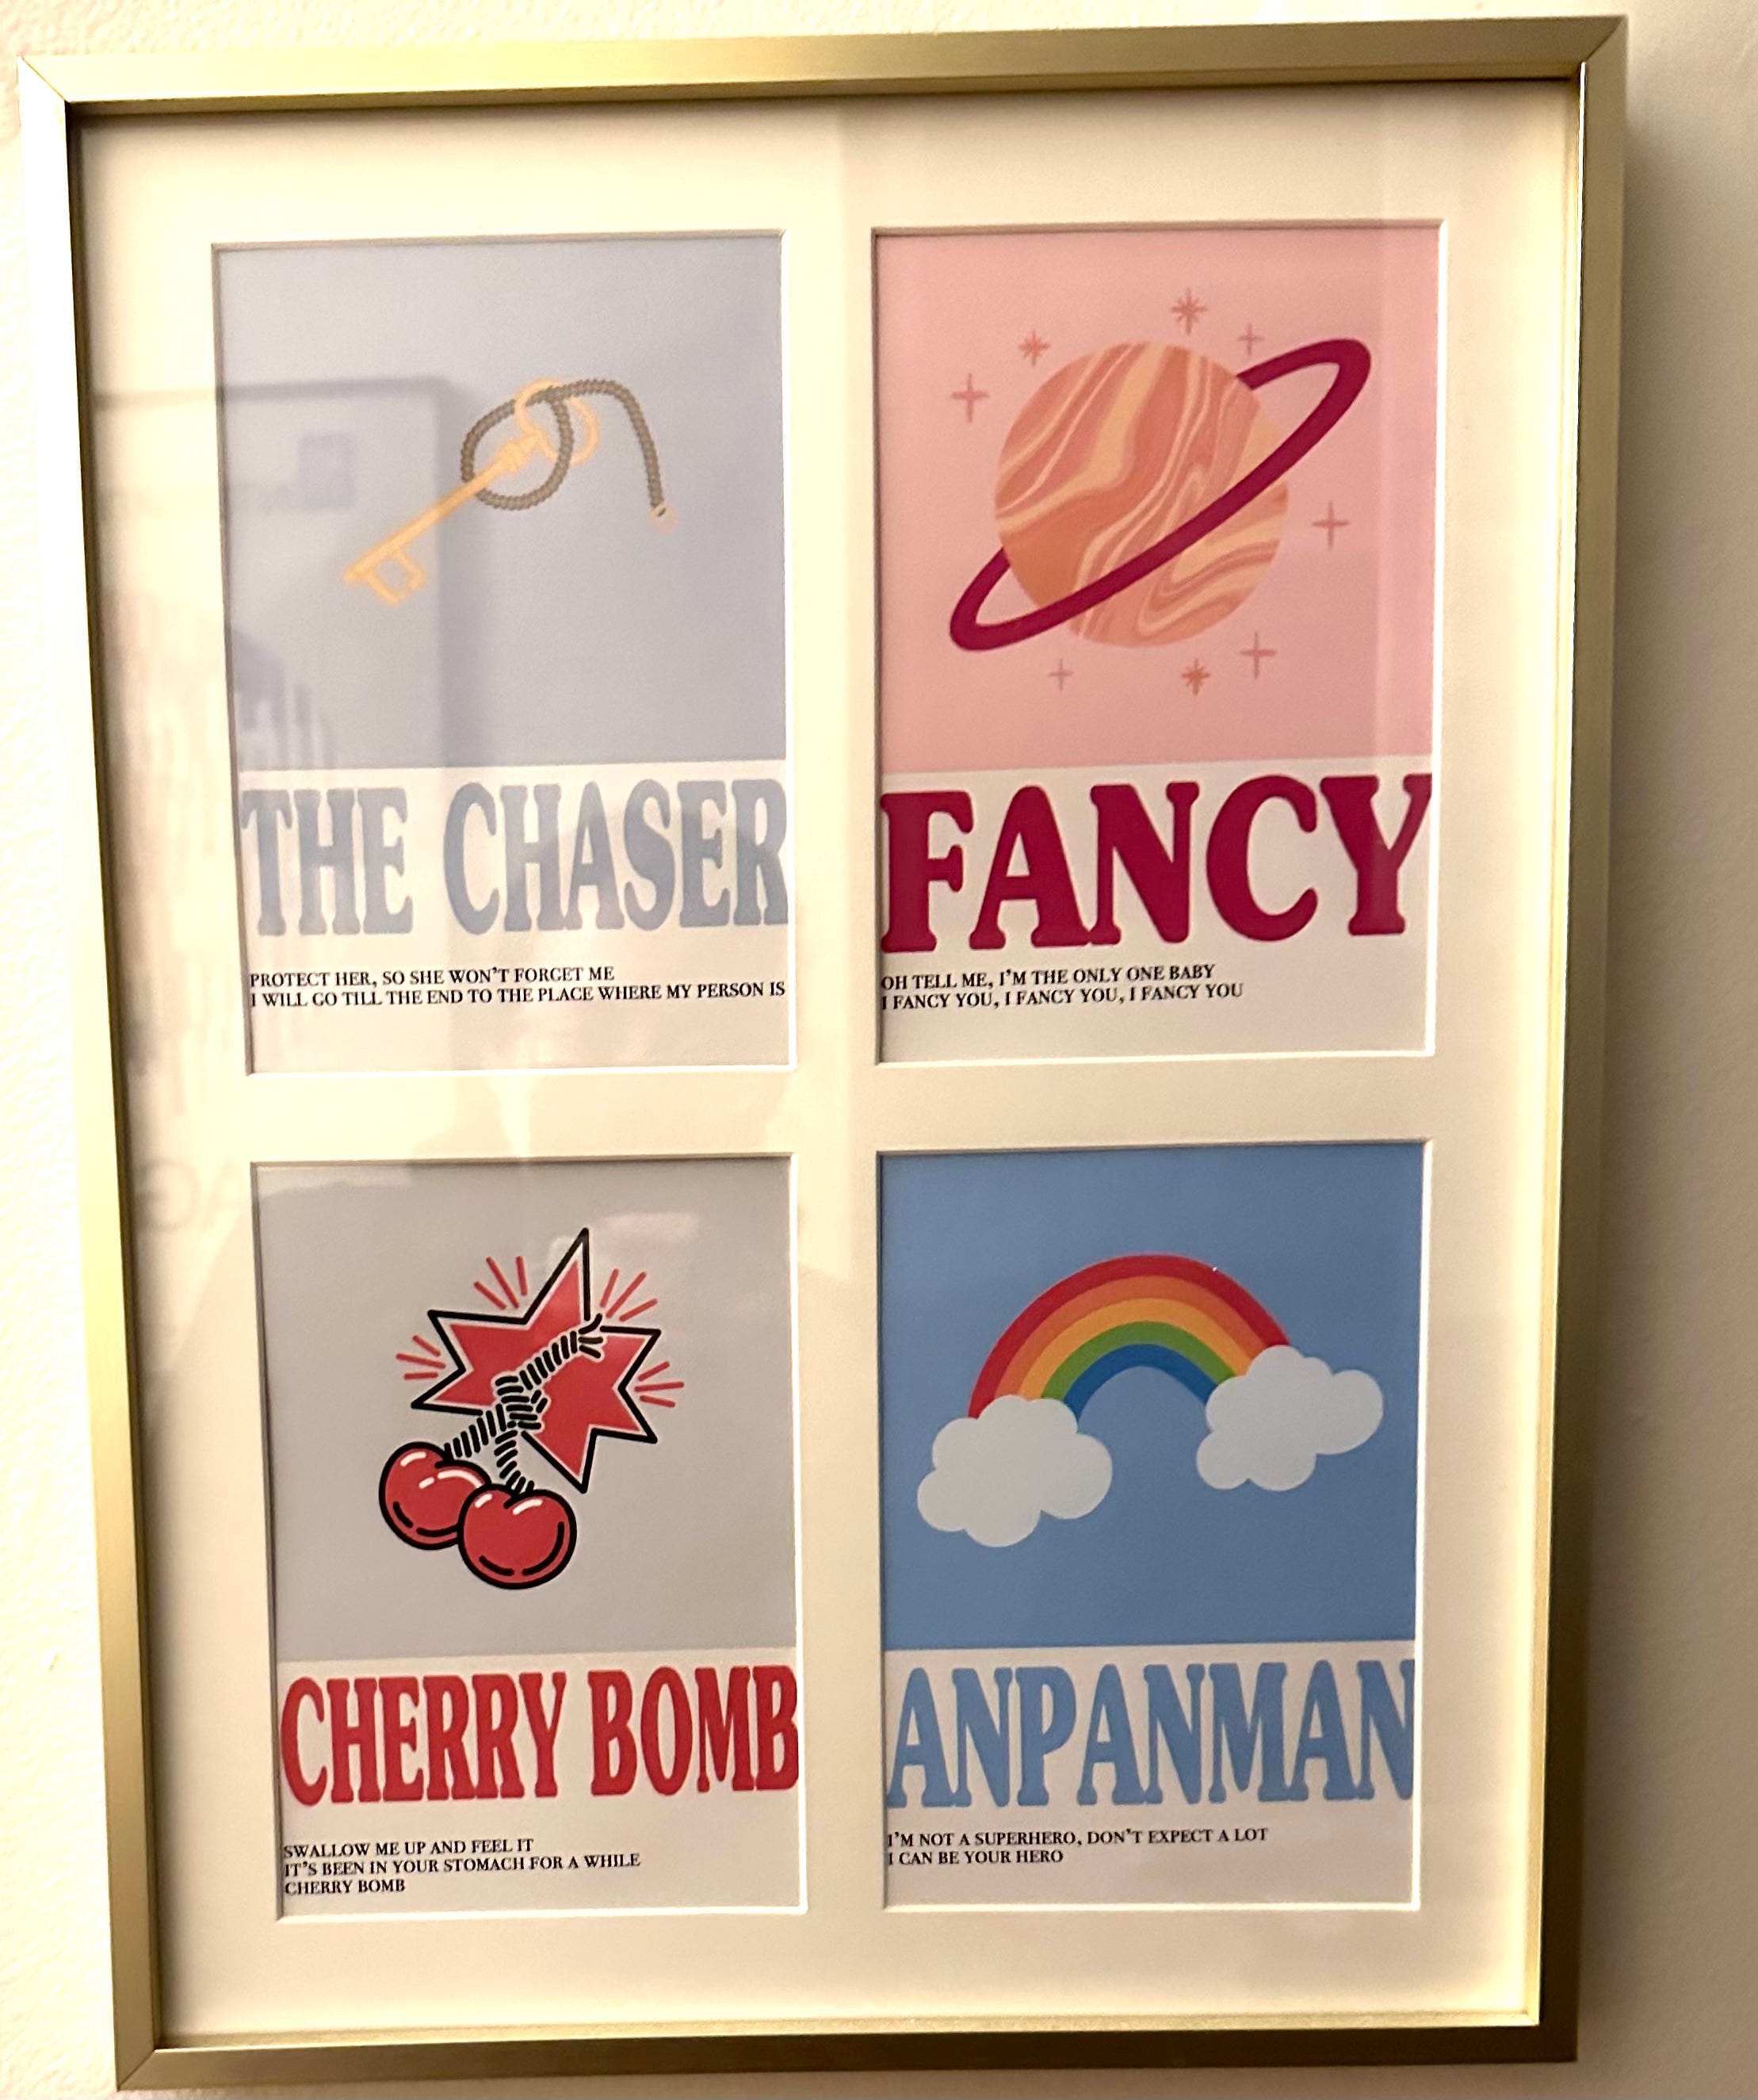 Picture of four graphics featuring The Chaser by Infinite, Fancy by TWICE, Cherry Bomb by NCT 127, and Anpanman by BTS